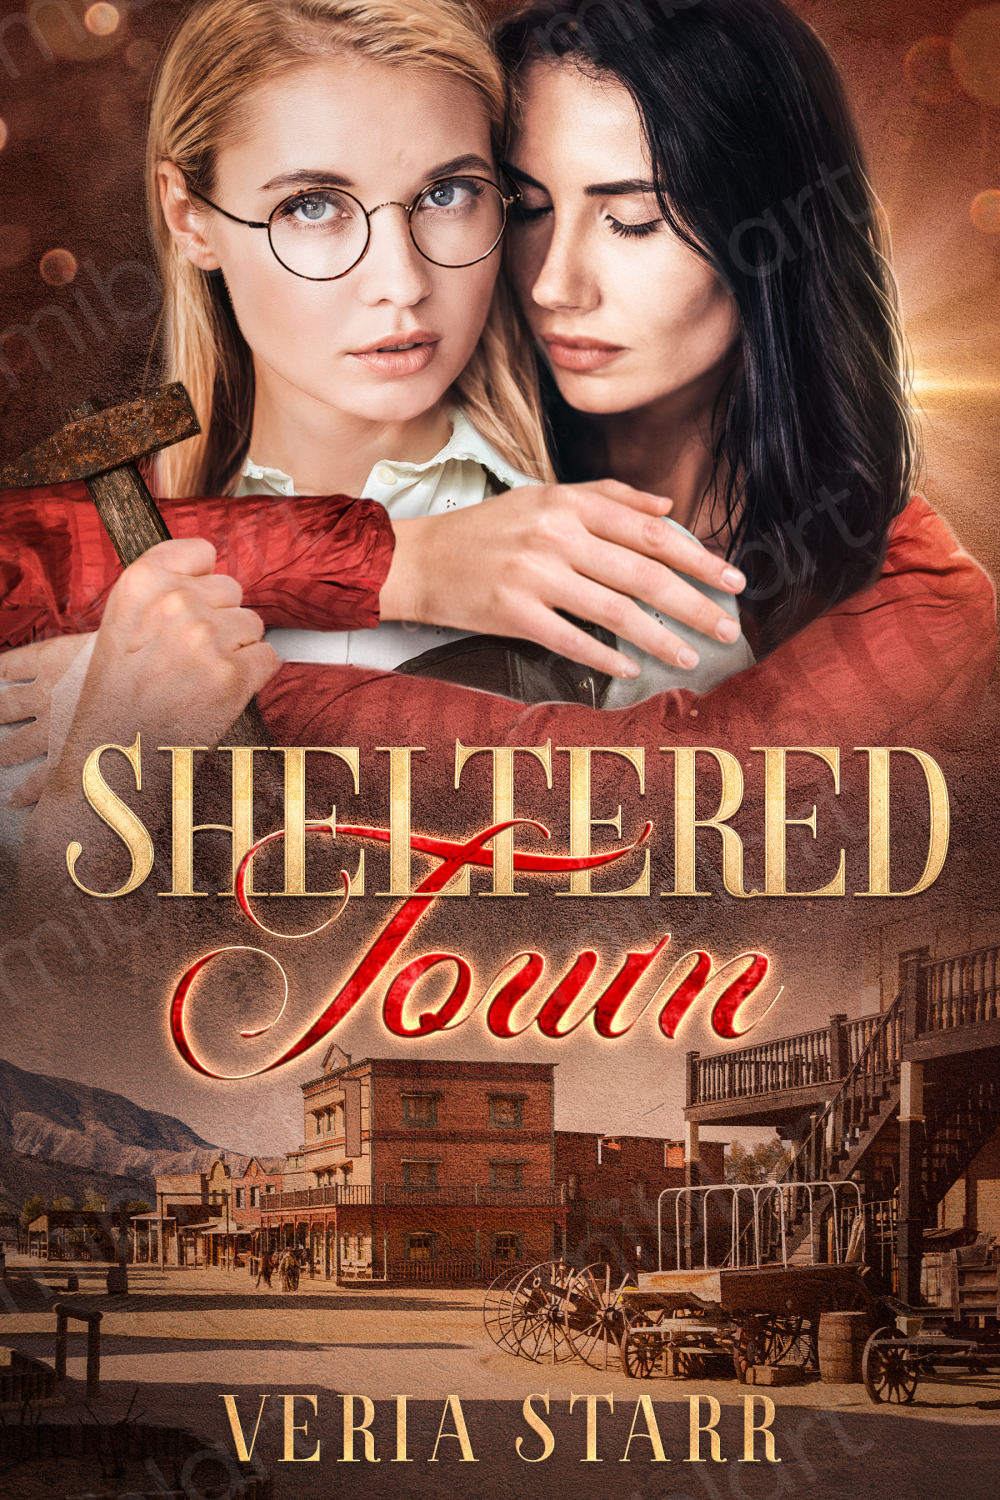 A book cover with a brunette woman holding a blond woman whose chin is tilted downward.